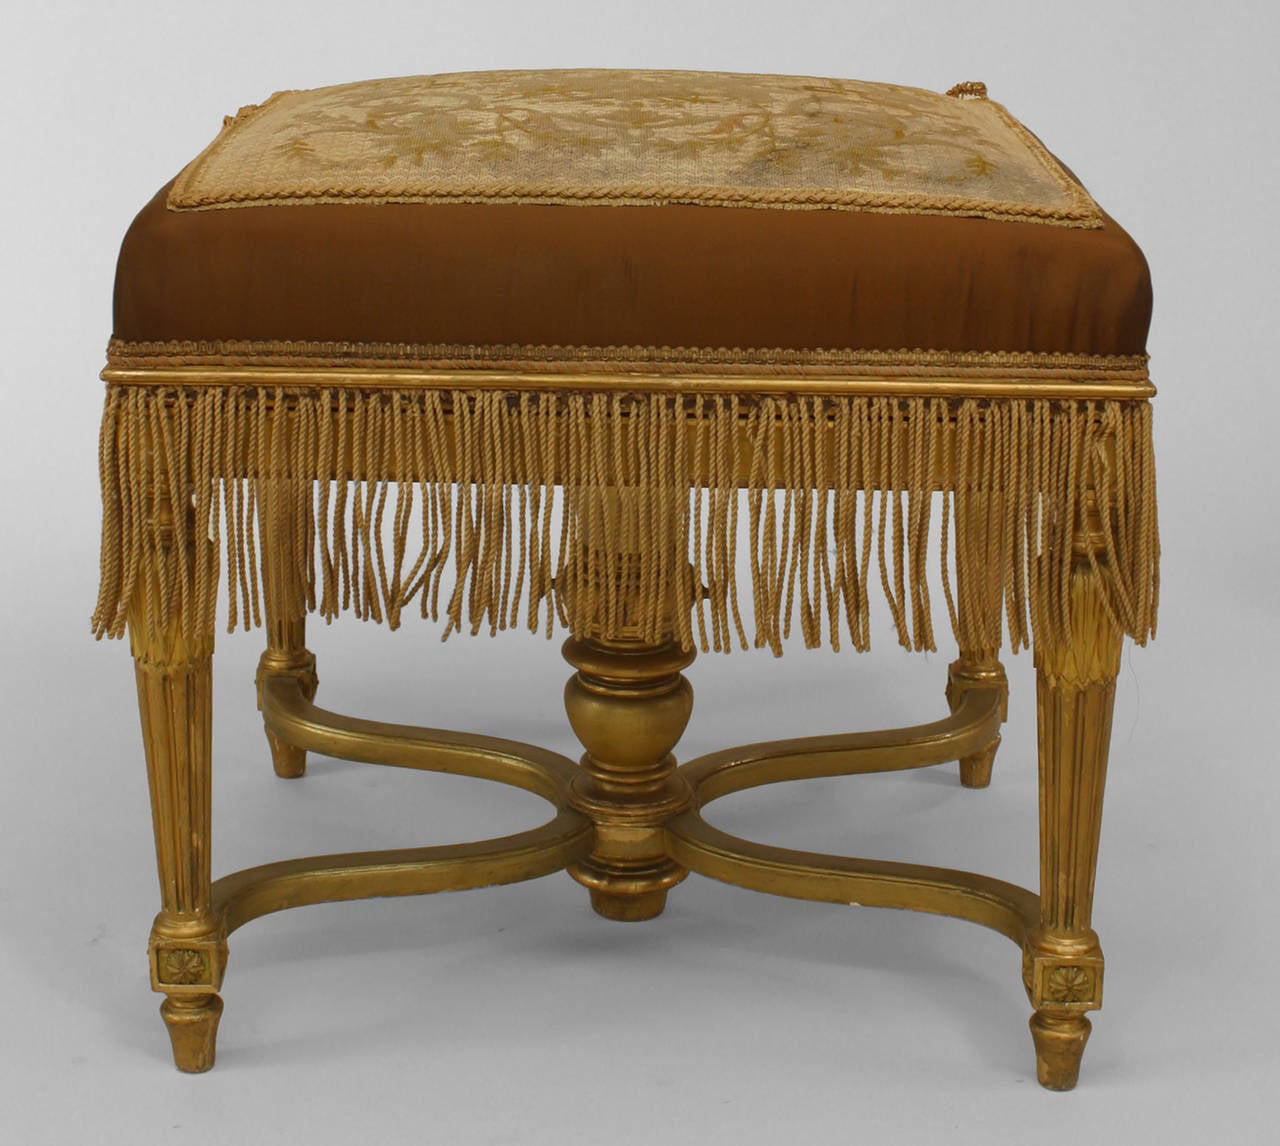 French Louis XVI Style Embroidered Bench with Fringe Trim In Good Condition For Sale In New York, NY